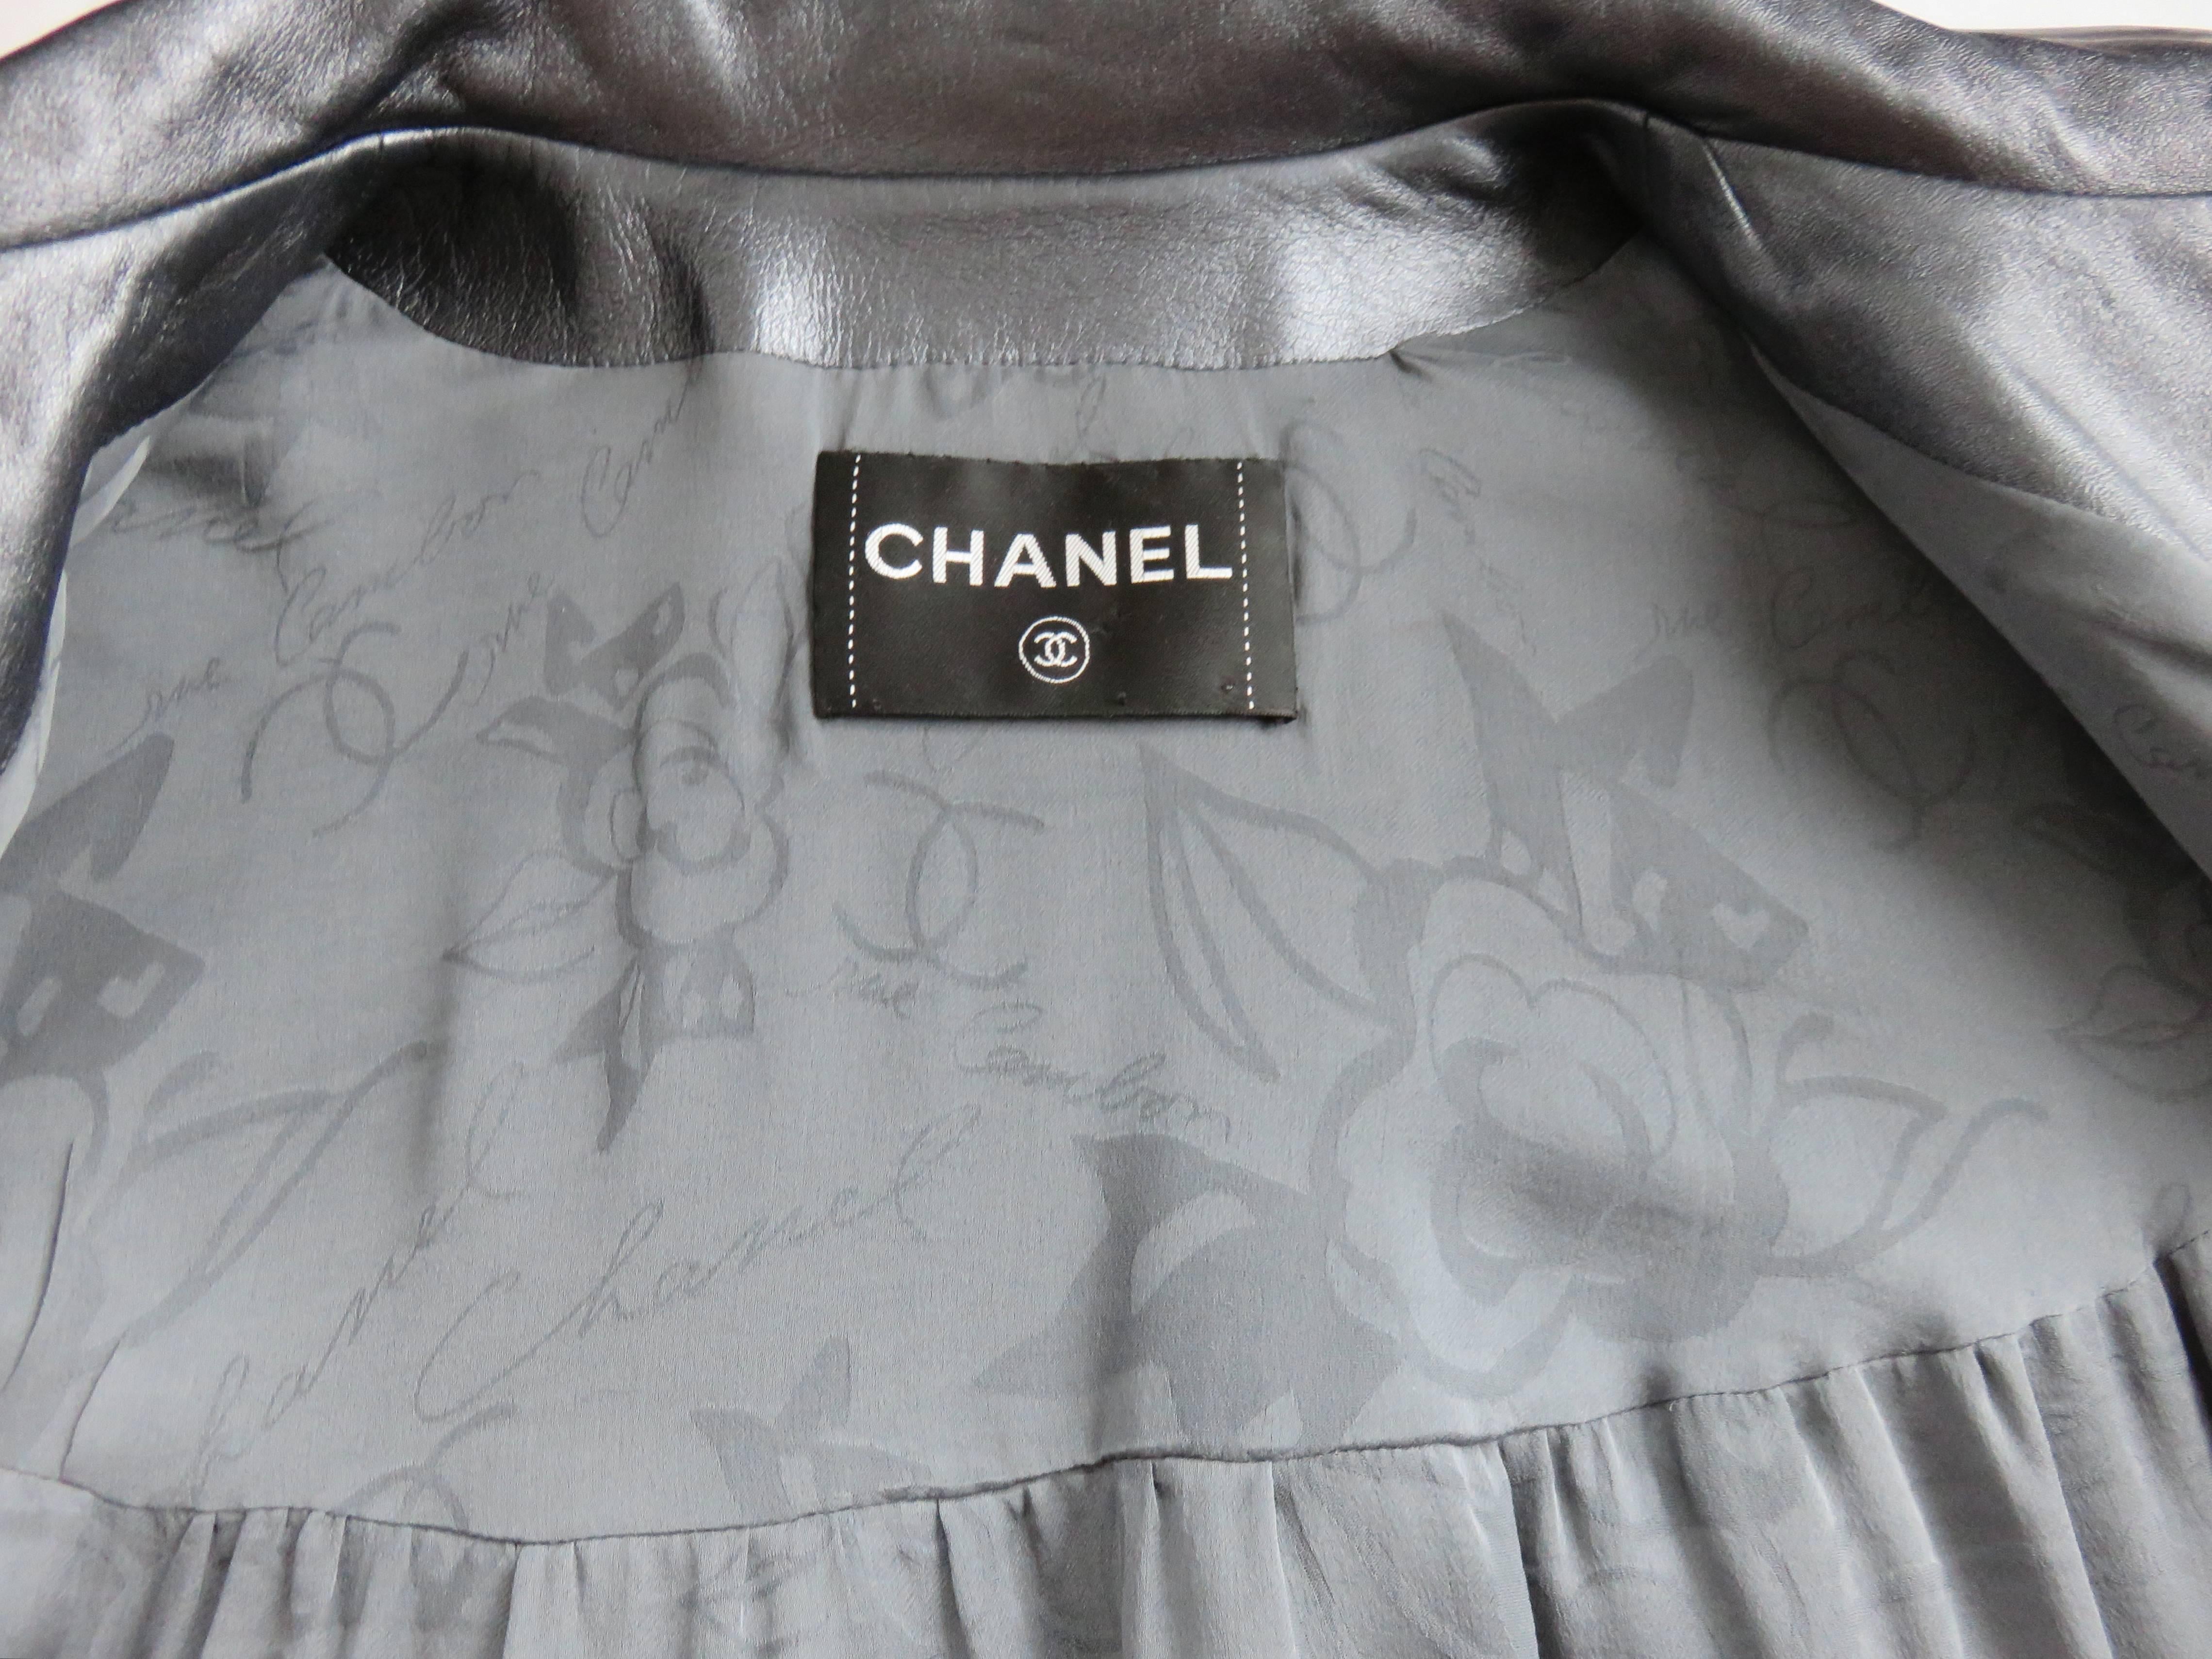 CHANEL PARIS Pewter lambskin leather coat - worn once For Sale 3